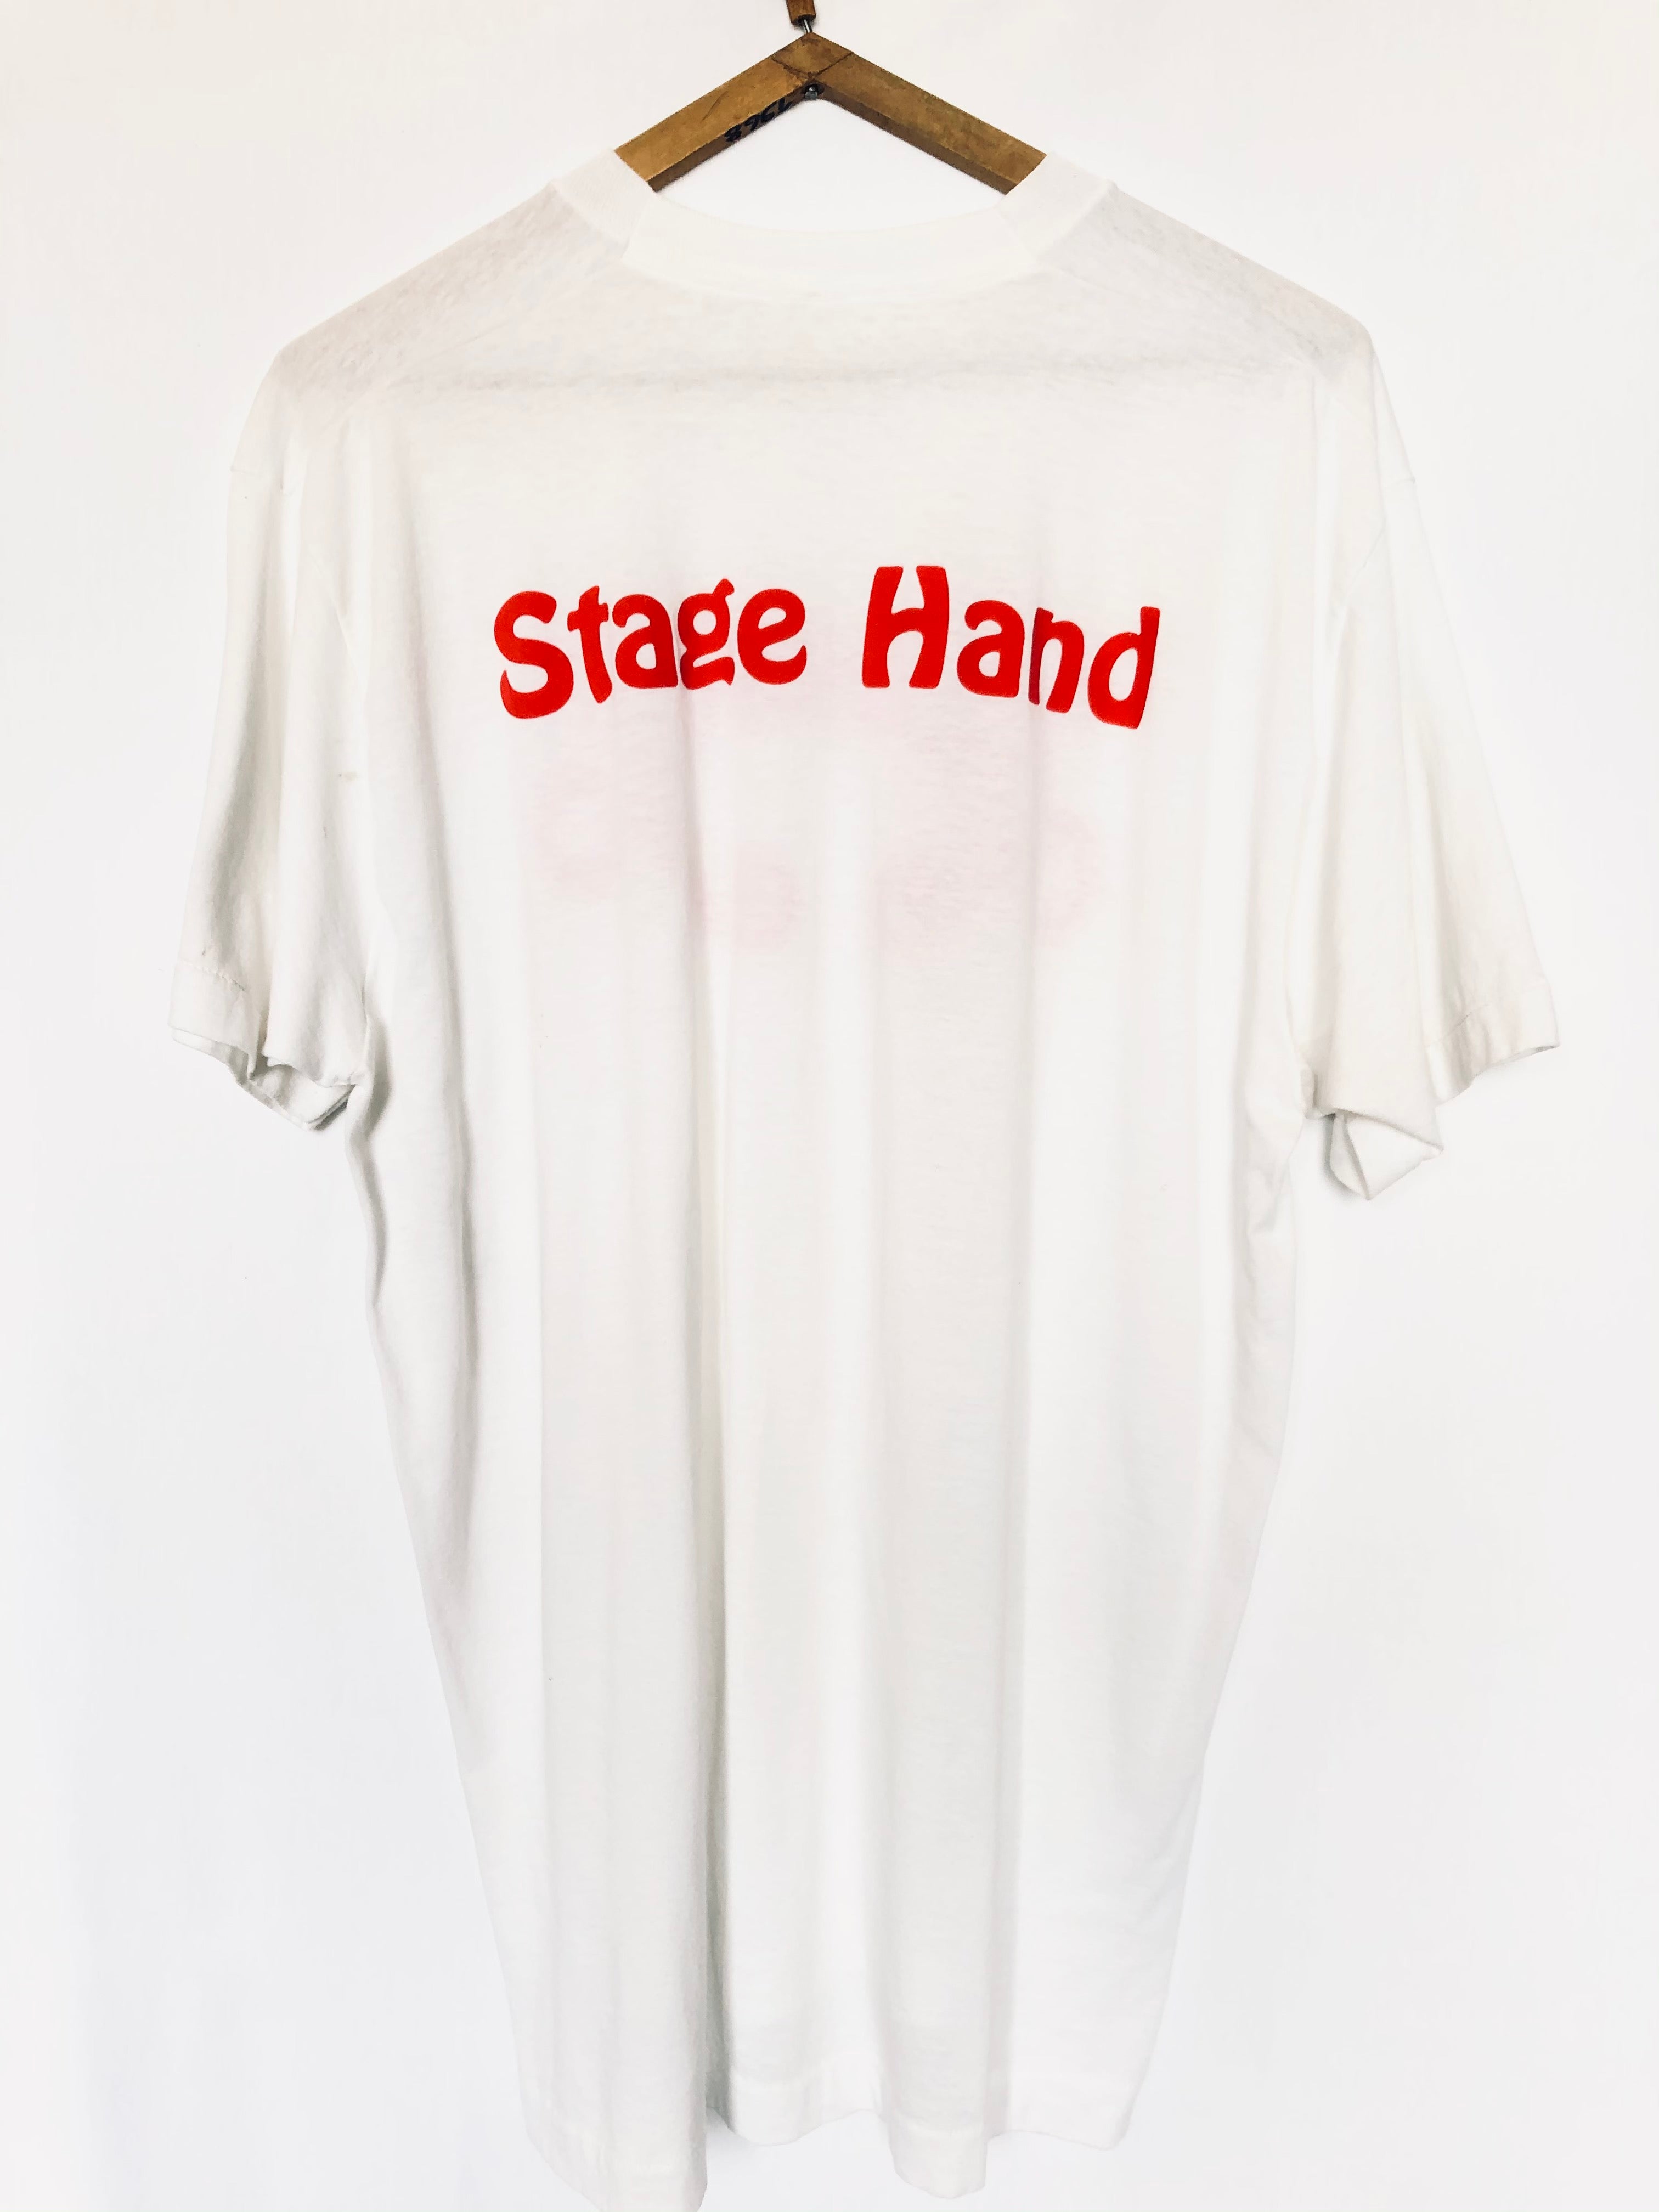 Authentic 80’s Alabama Stage Hand Concert Tee